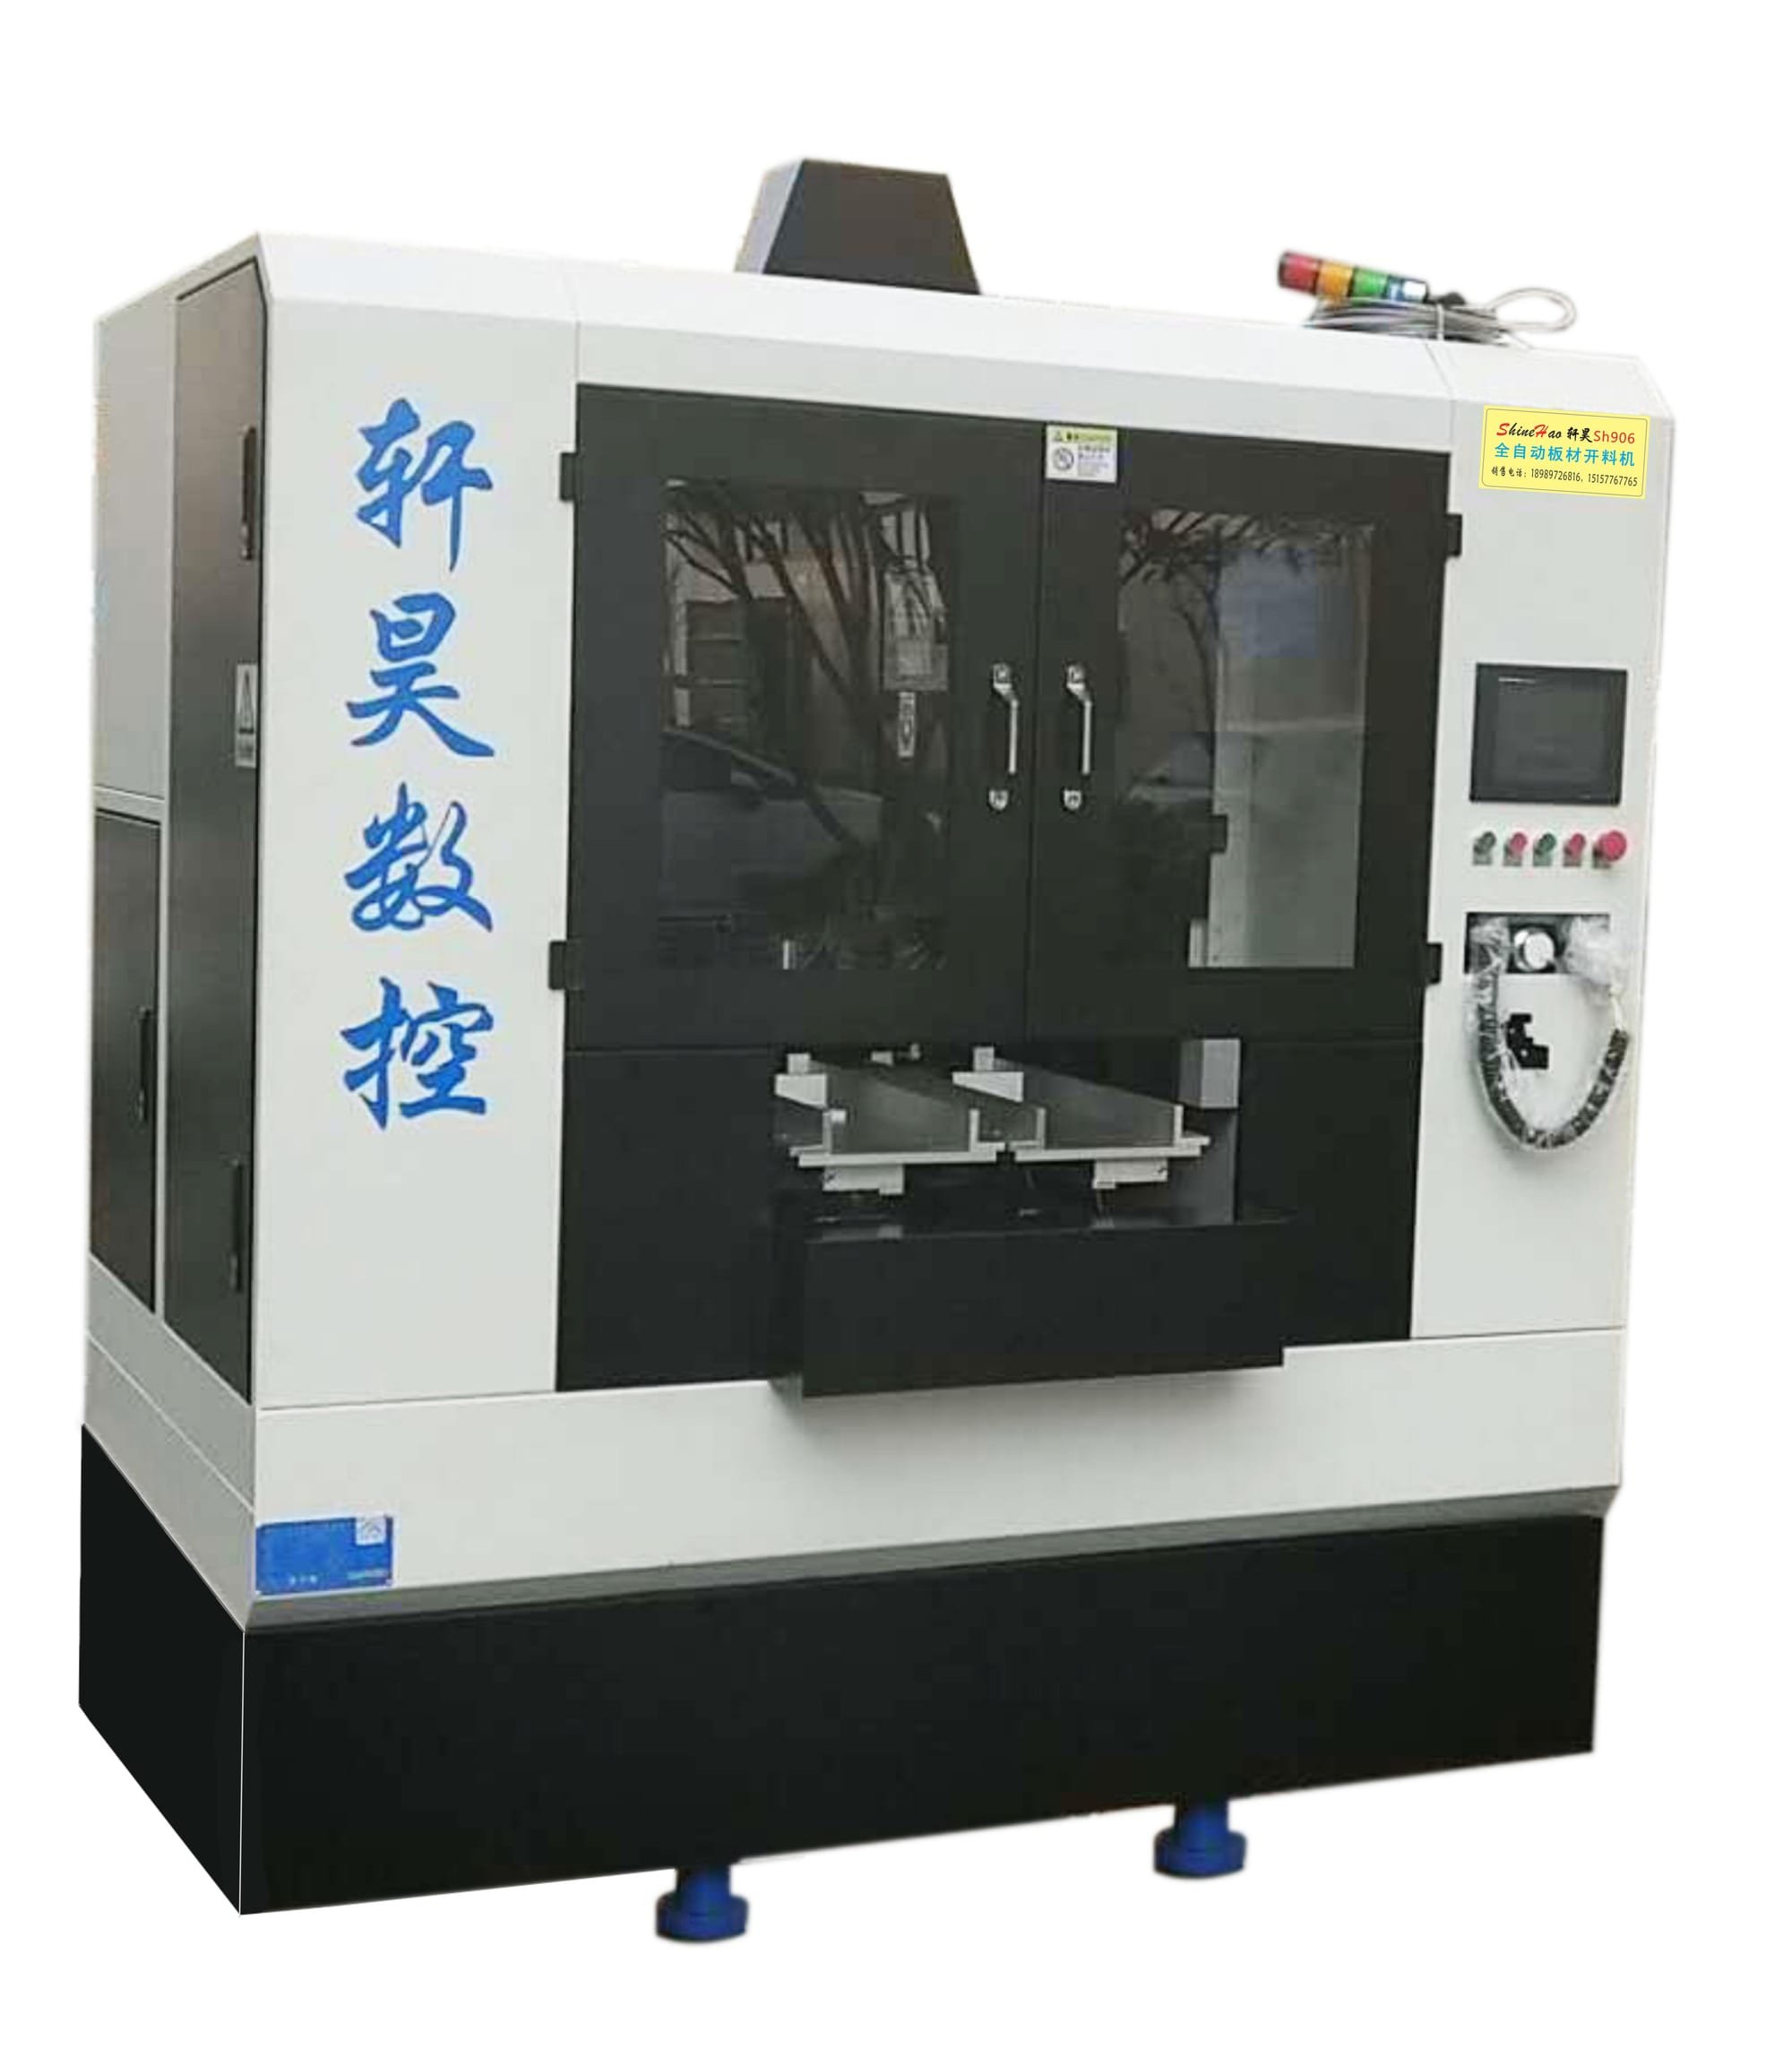 Patented SH906 automatic temple carving machine is on sale